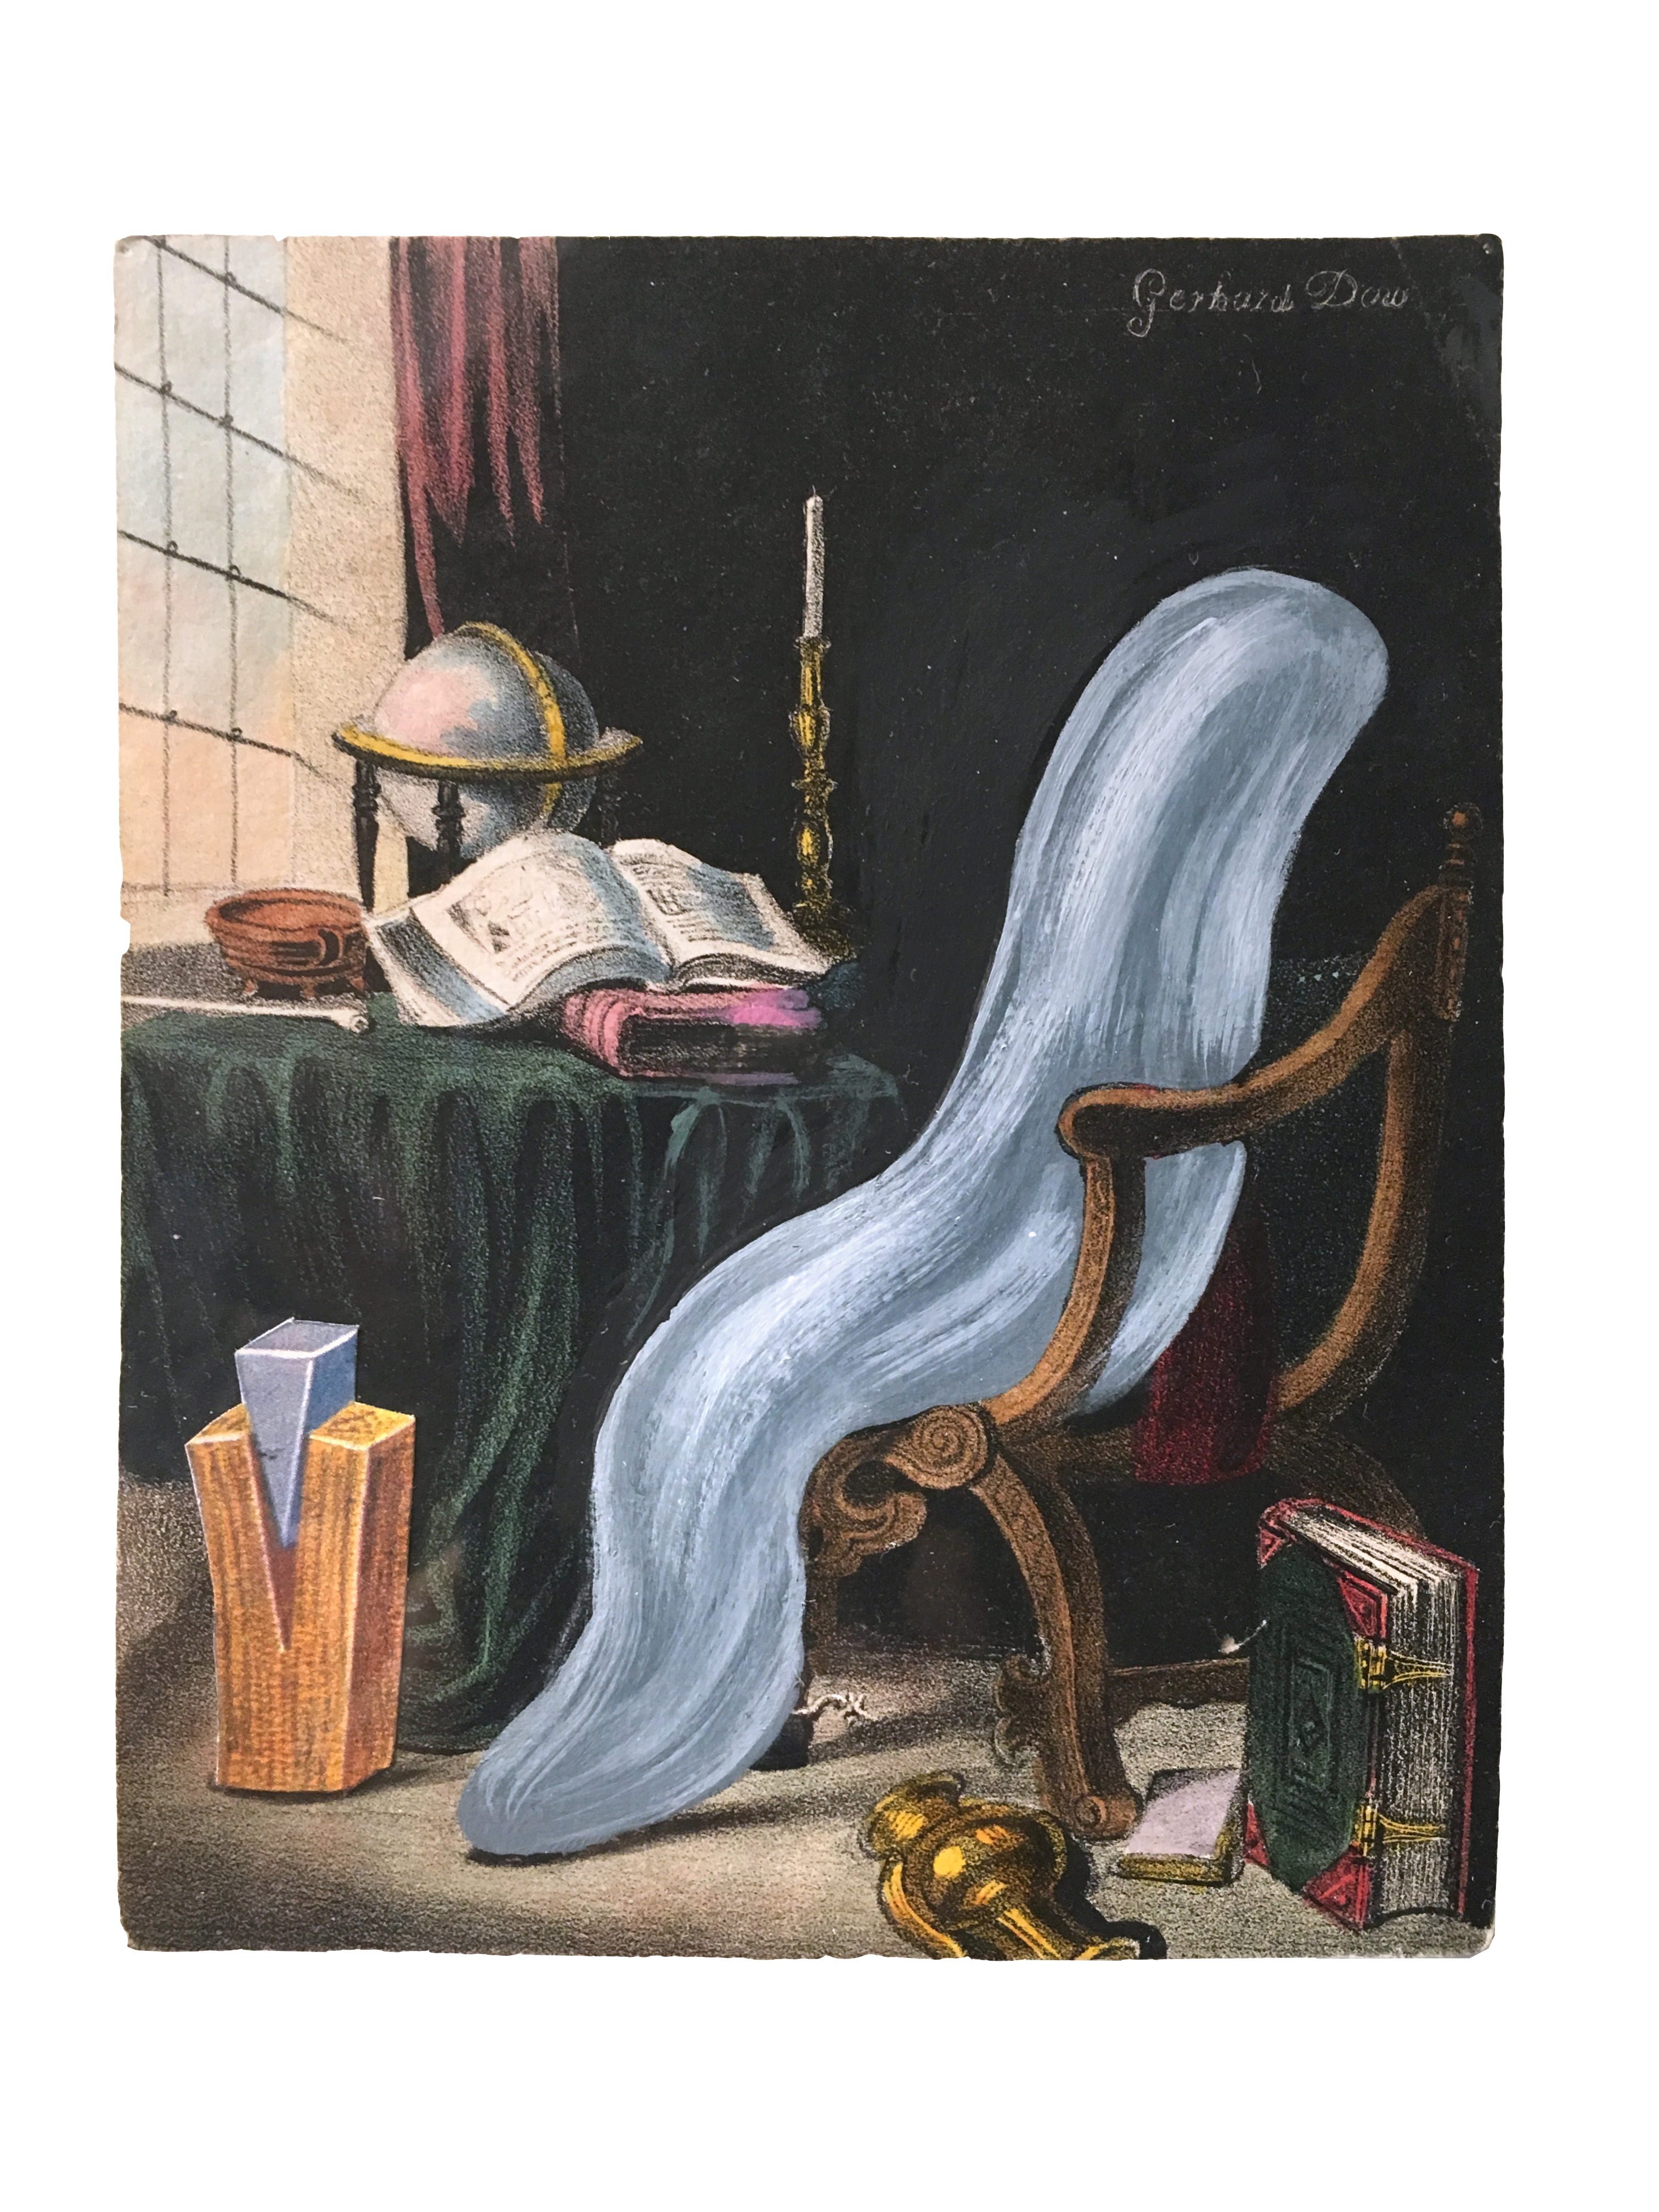 16. Lawless Boy, 2016, oil on antique hand-colored engraving. 12 X 10 1_2 inches